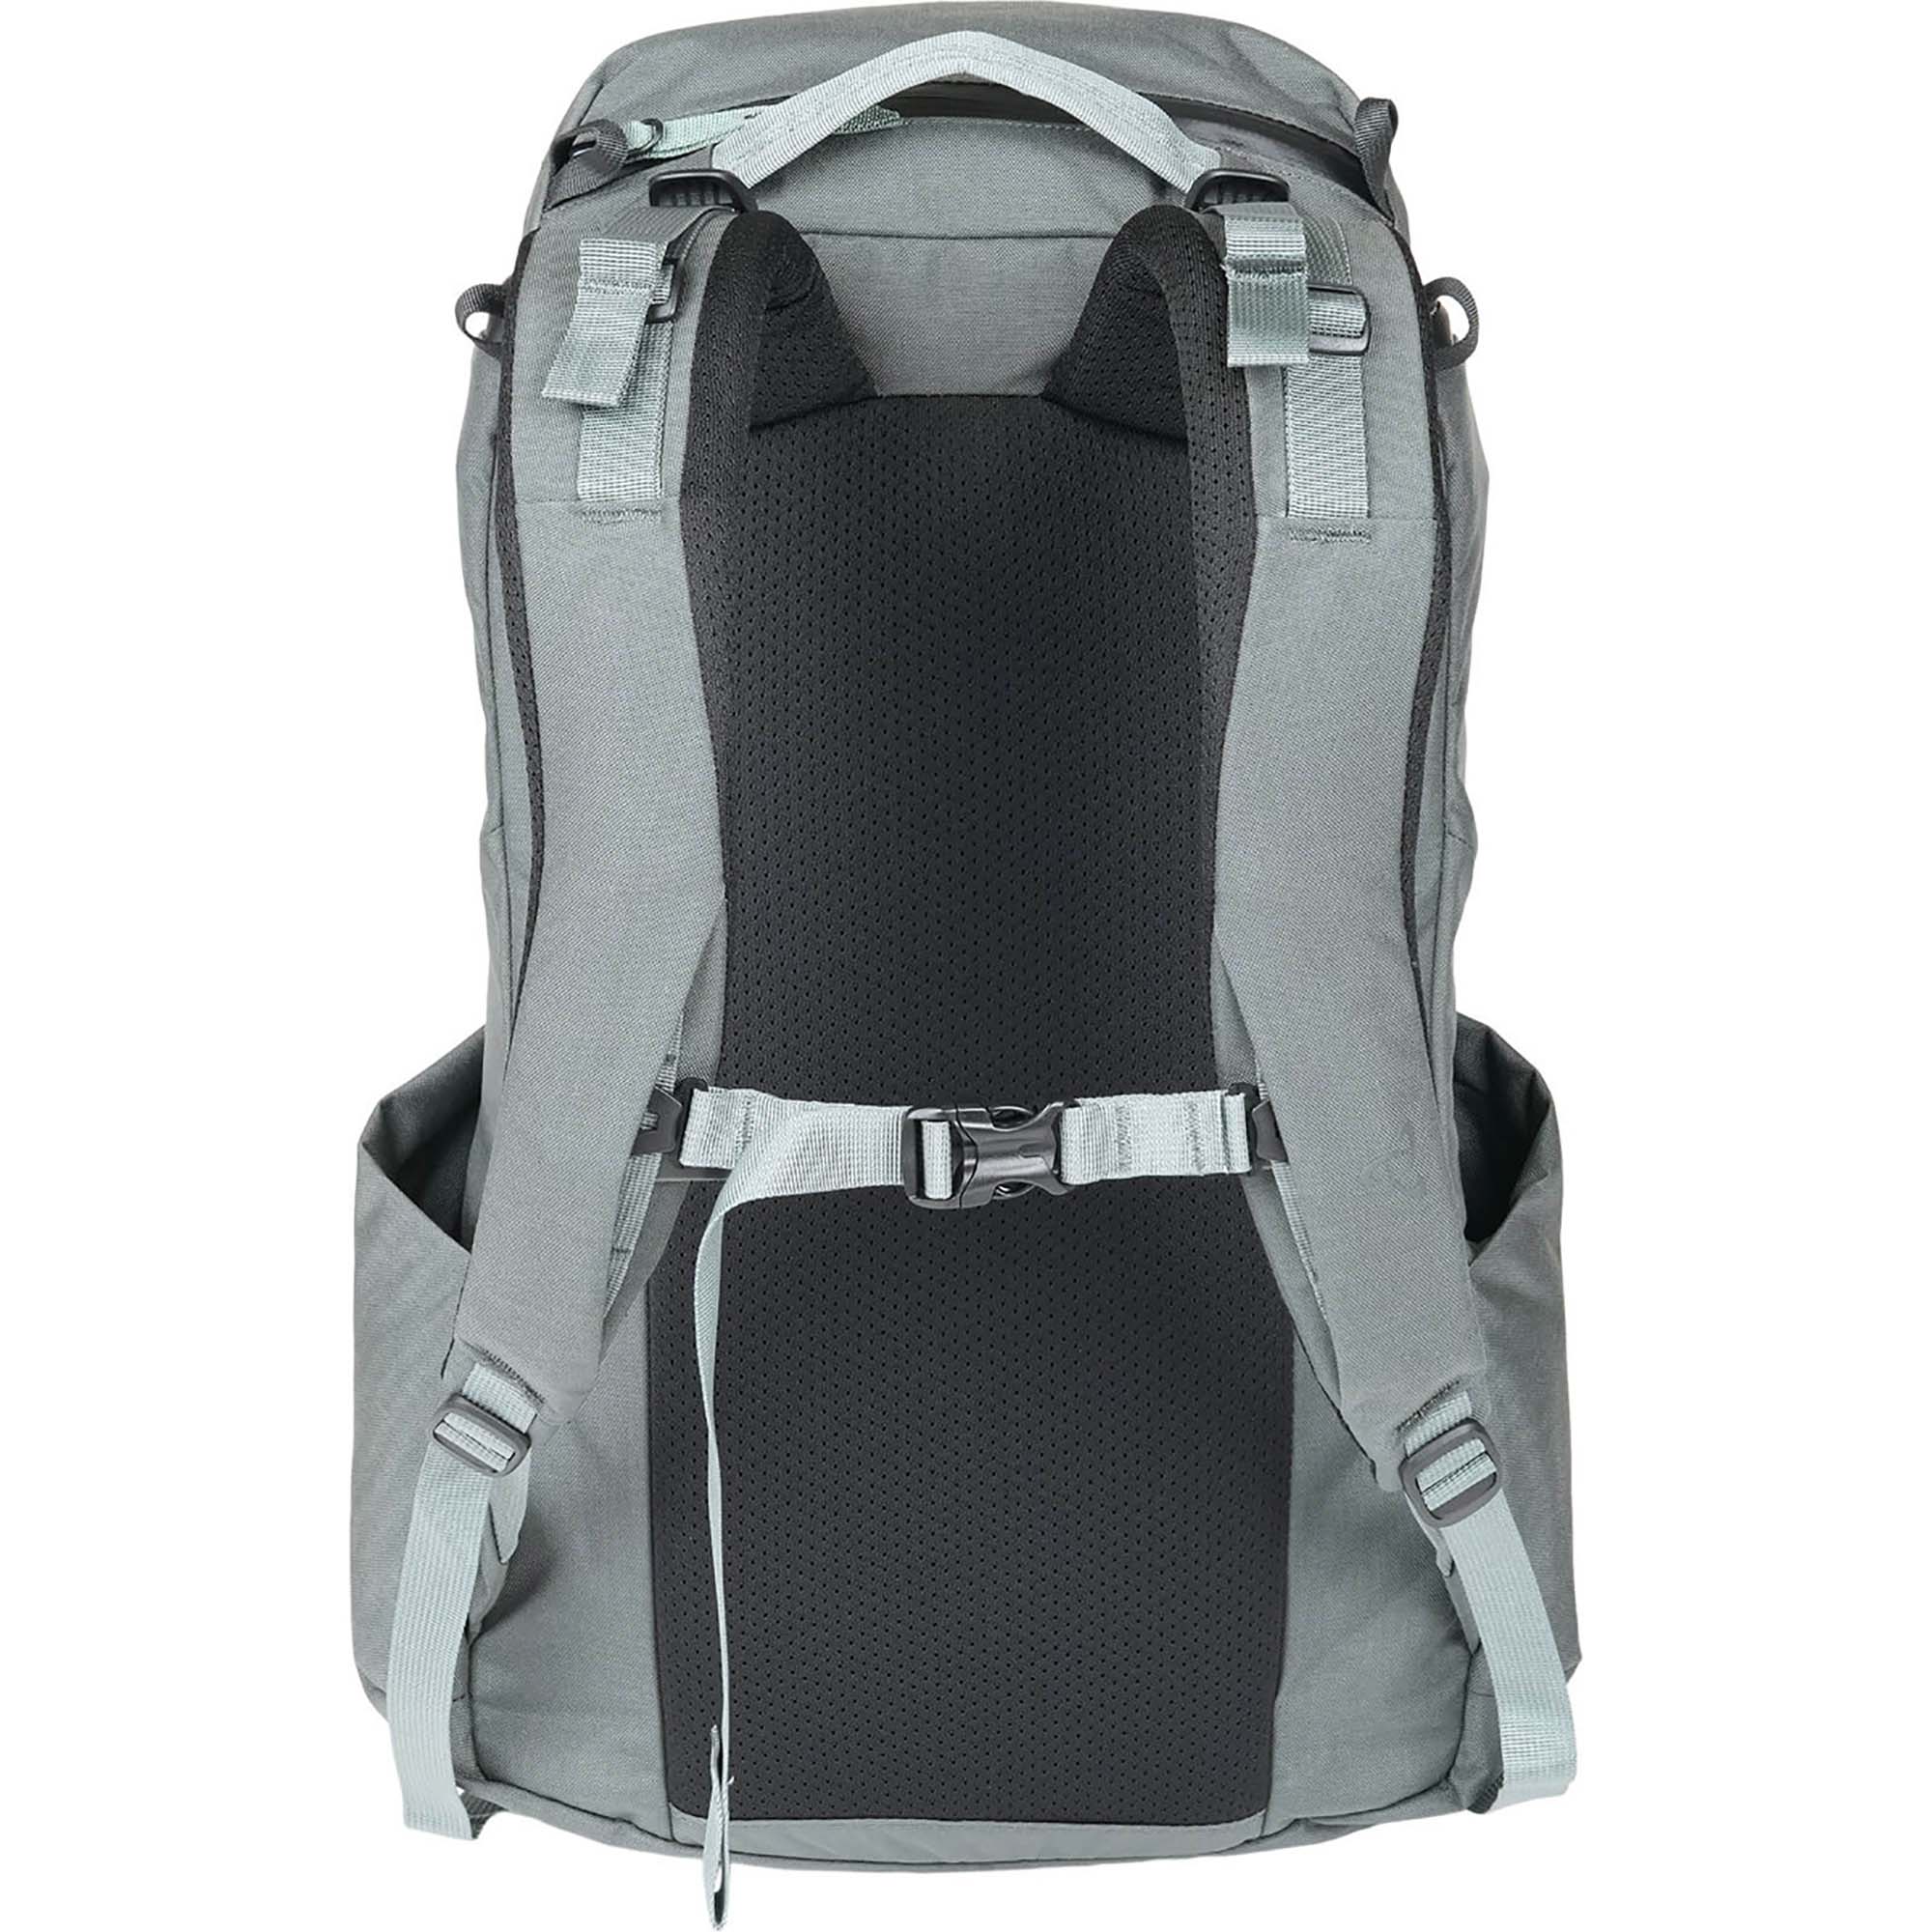 Mystery Ranch  Catalyst 22 Hiking/Trekking Backpack